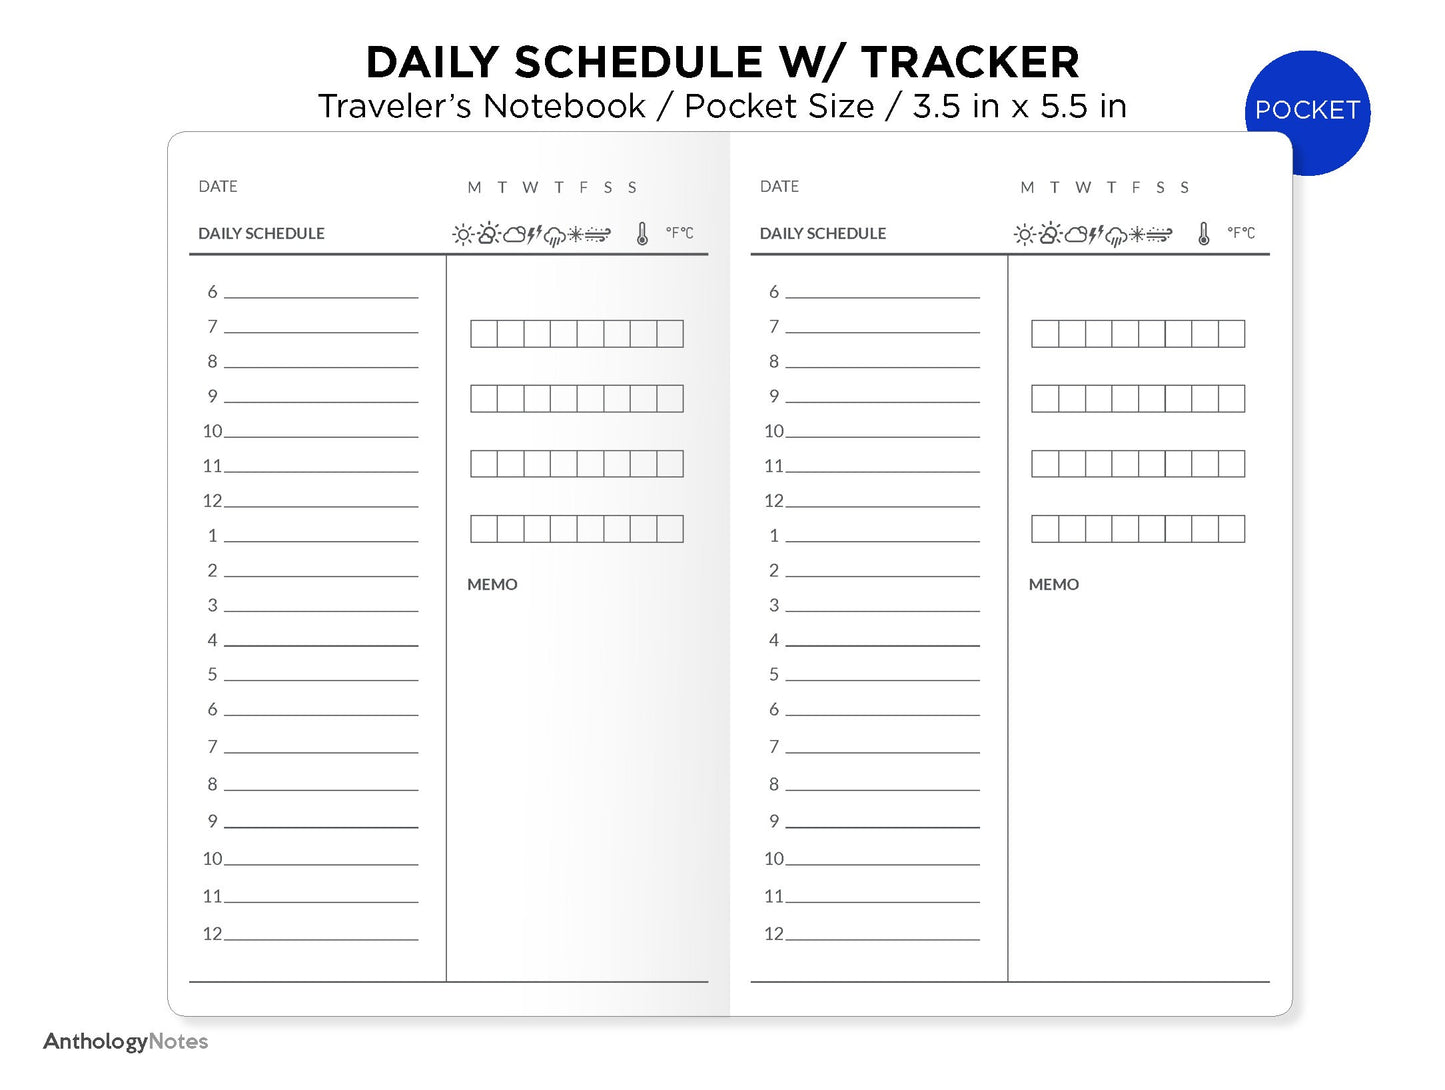 TN POCKET Daily Schedule with Tracker Printable Traveler's Notebook Insert FN027